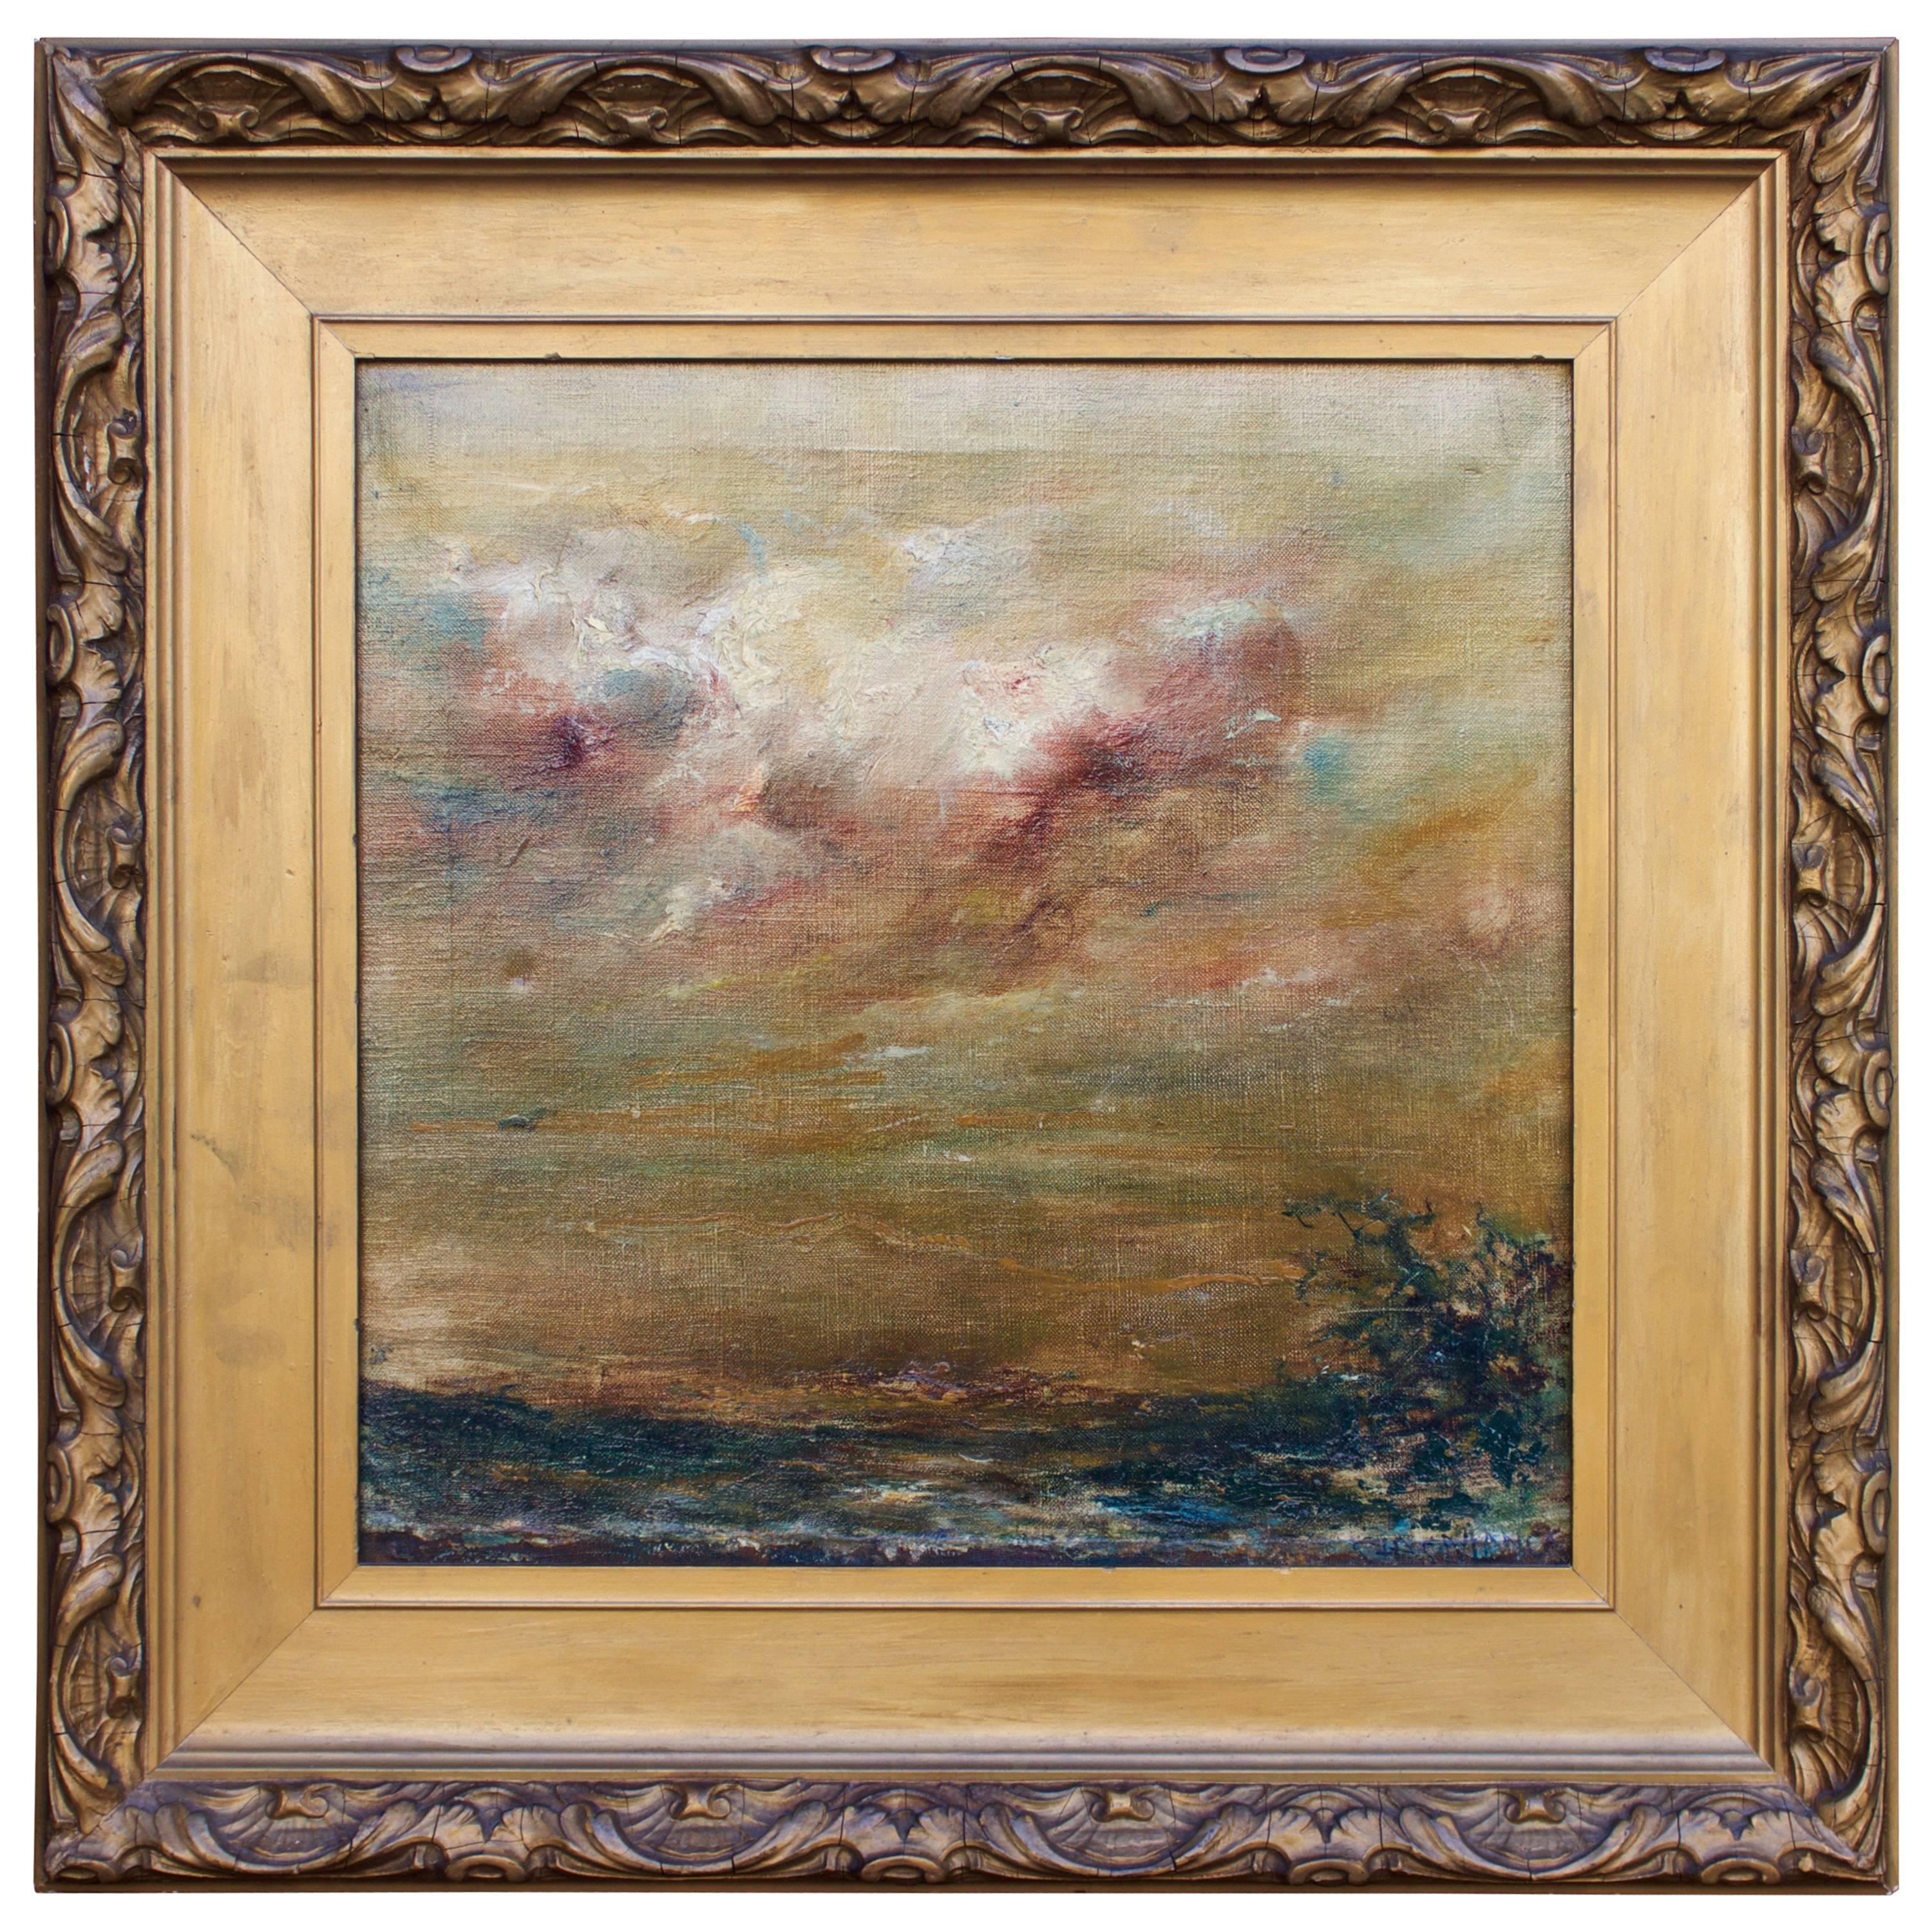 "Tempest Brewing" Study by Charles M. Lang For Sale